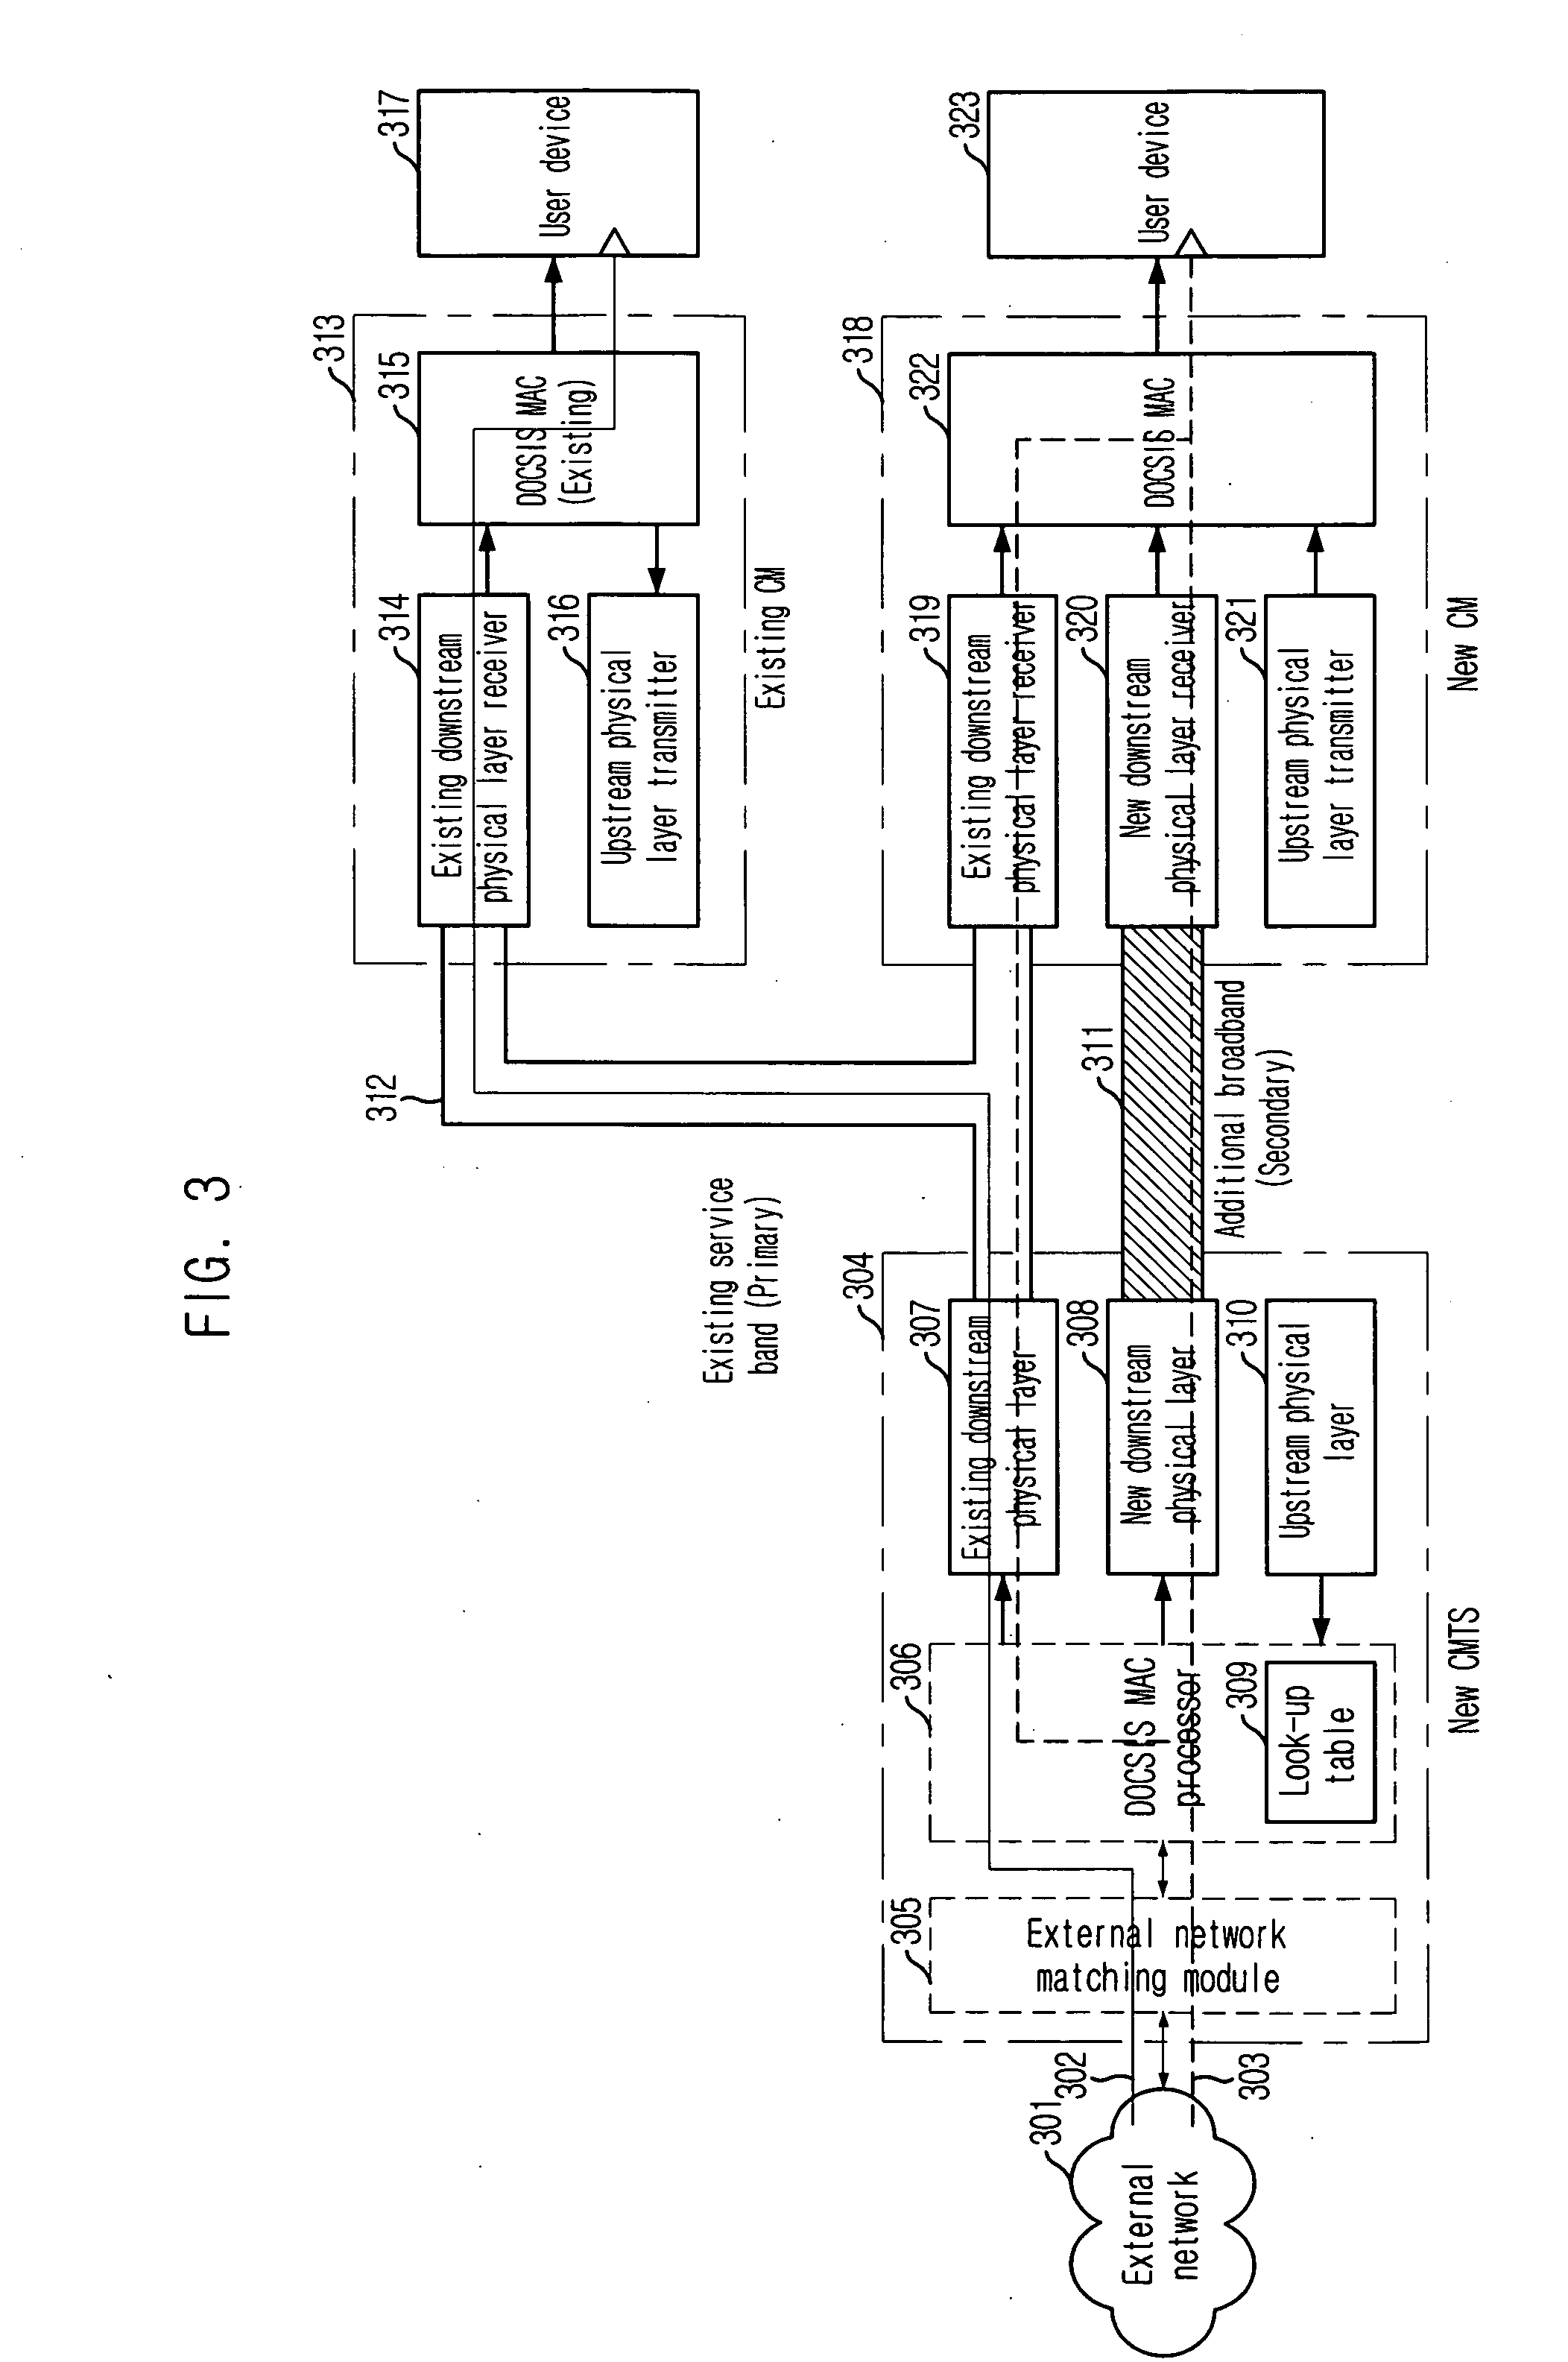 Apparatus and method for multimedia data transmission and reception in cable network using broadband and physical layer frame structure